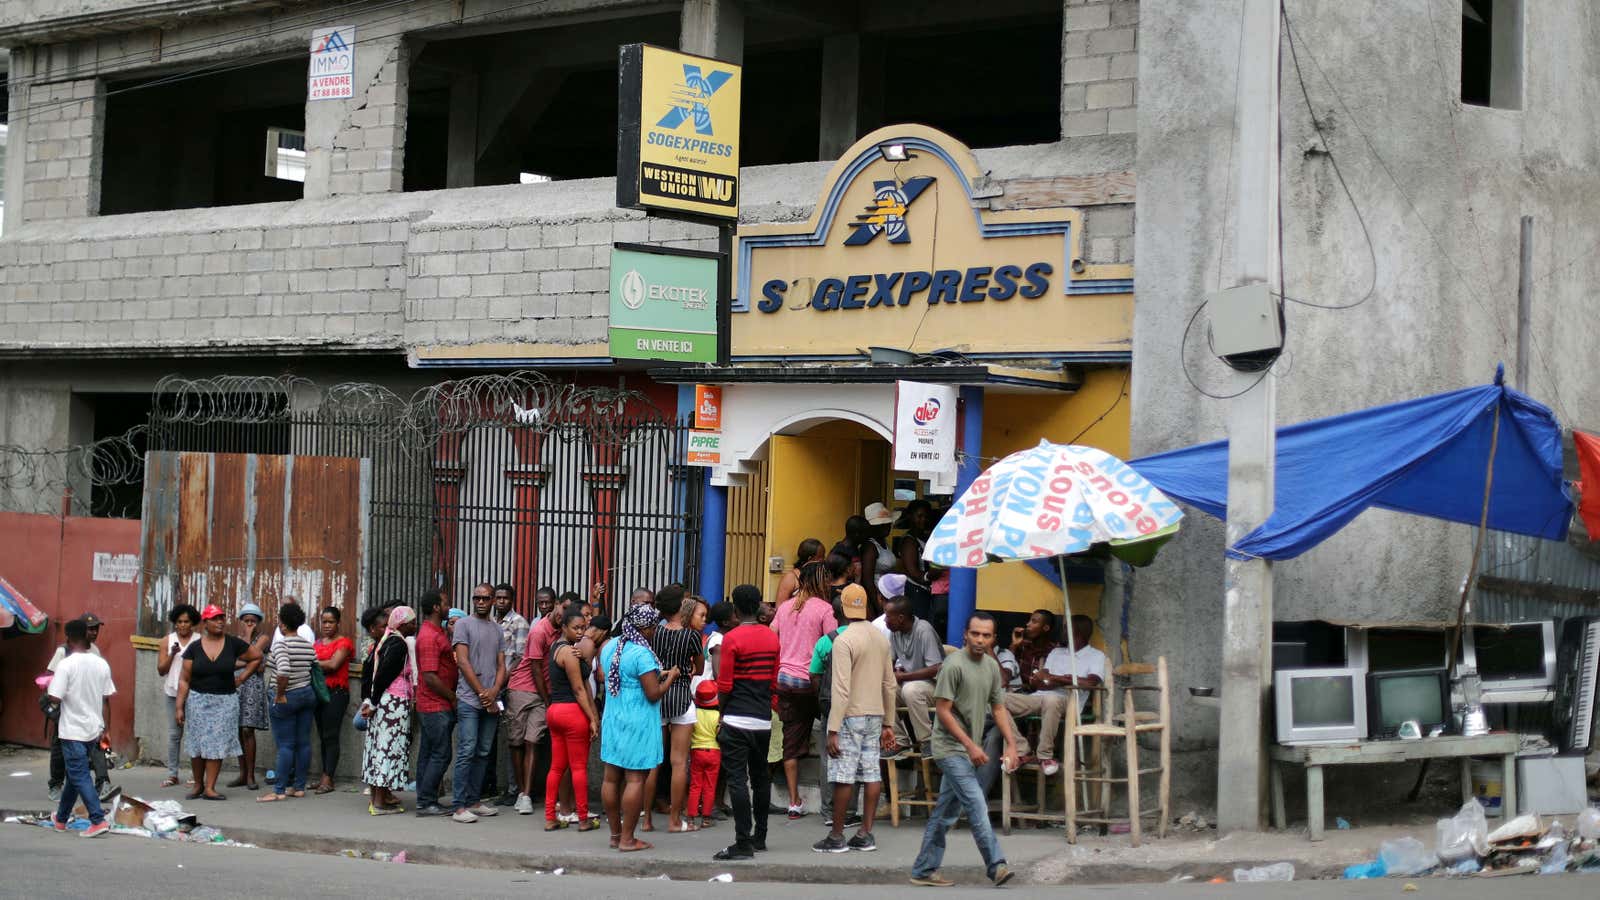 People line up outside a money transfer point in Haiti. About 37% of the GDP of the country in 2019 came from remittances.